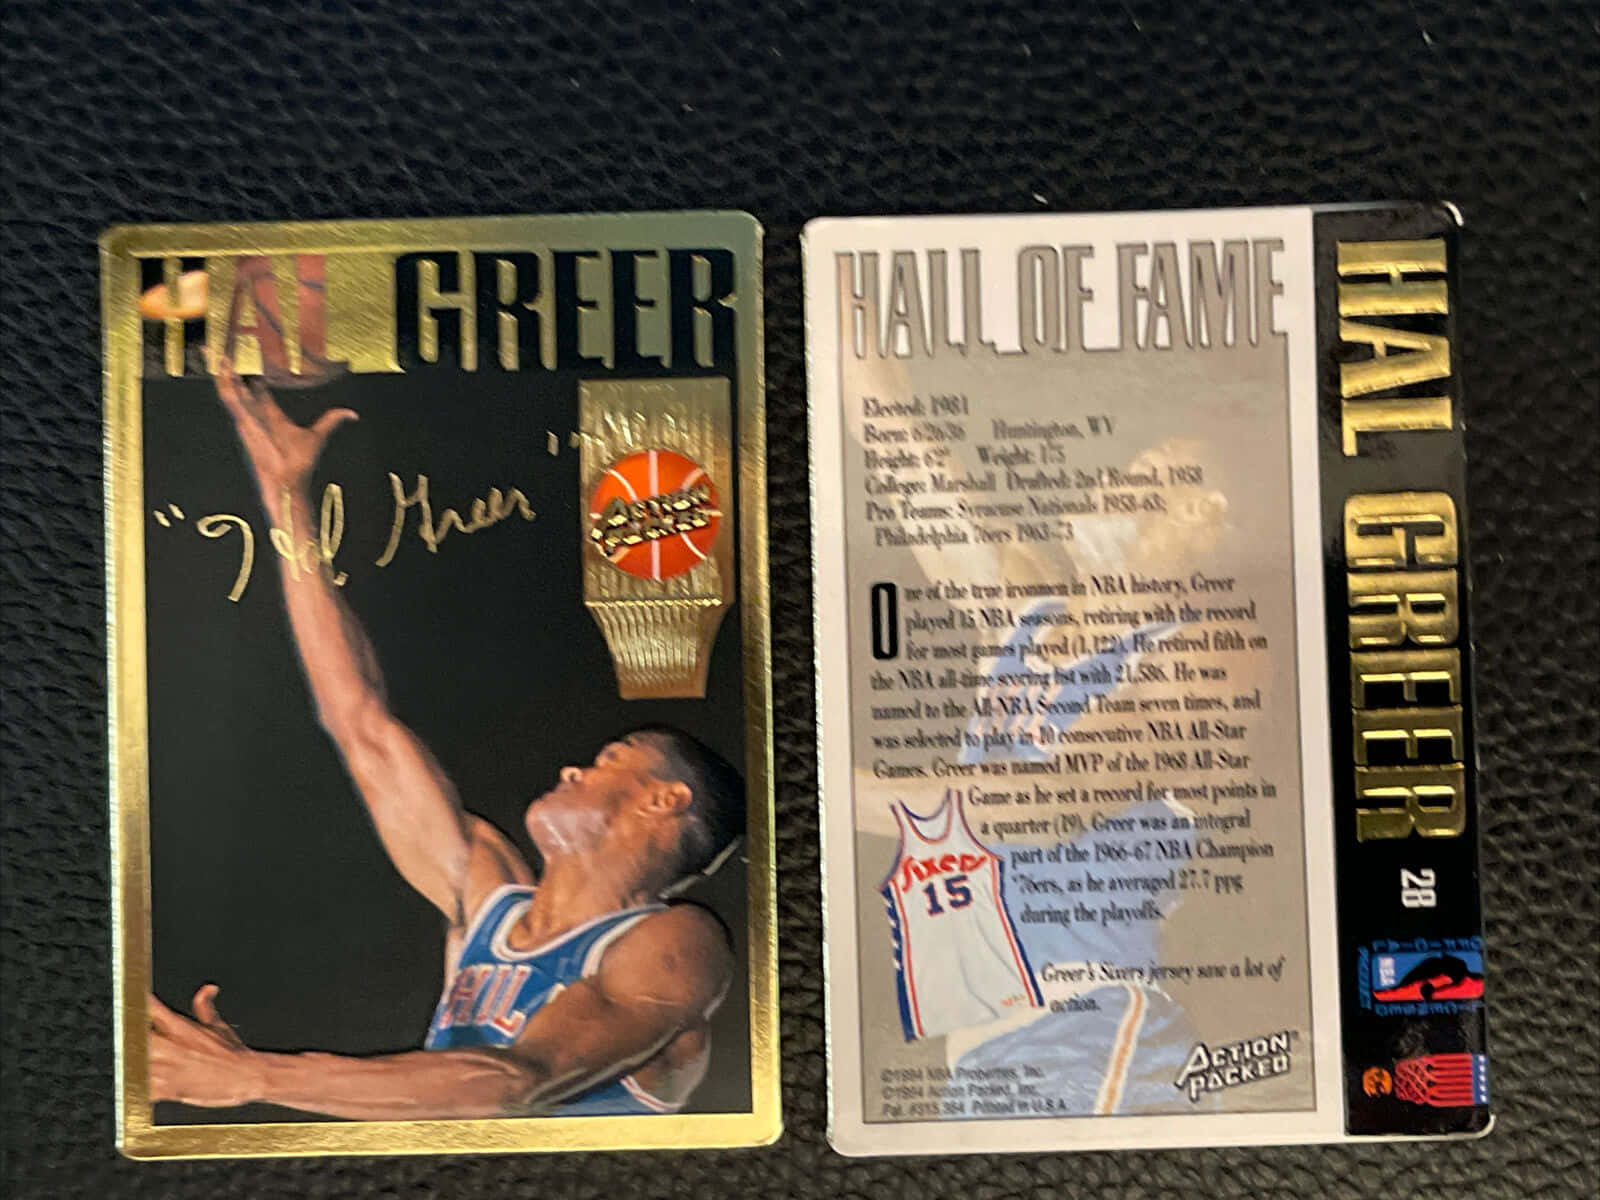 Hall Of Fame Trading Card Of Hal Greer Wallpaper